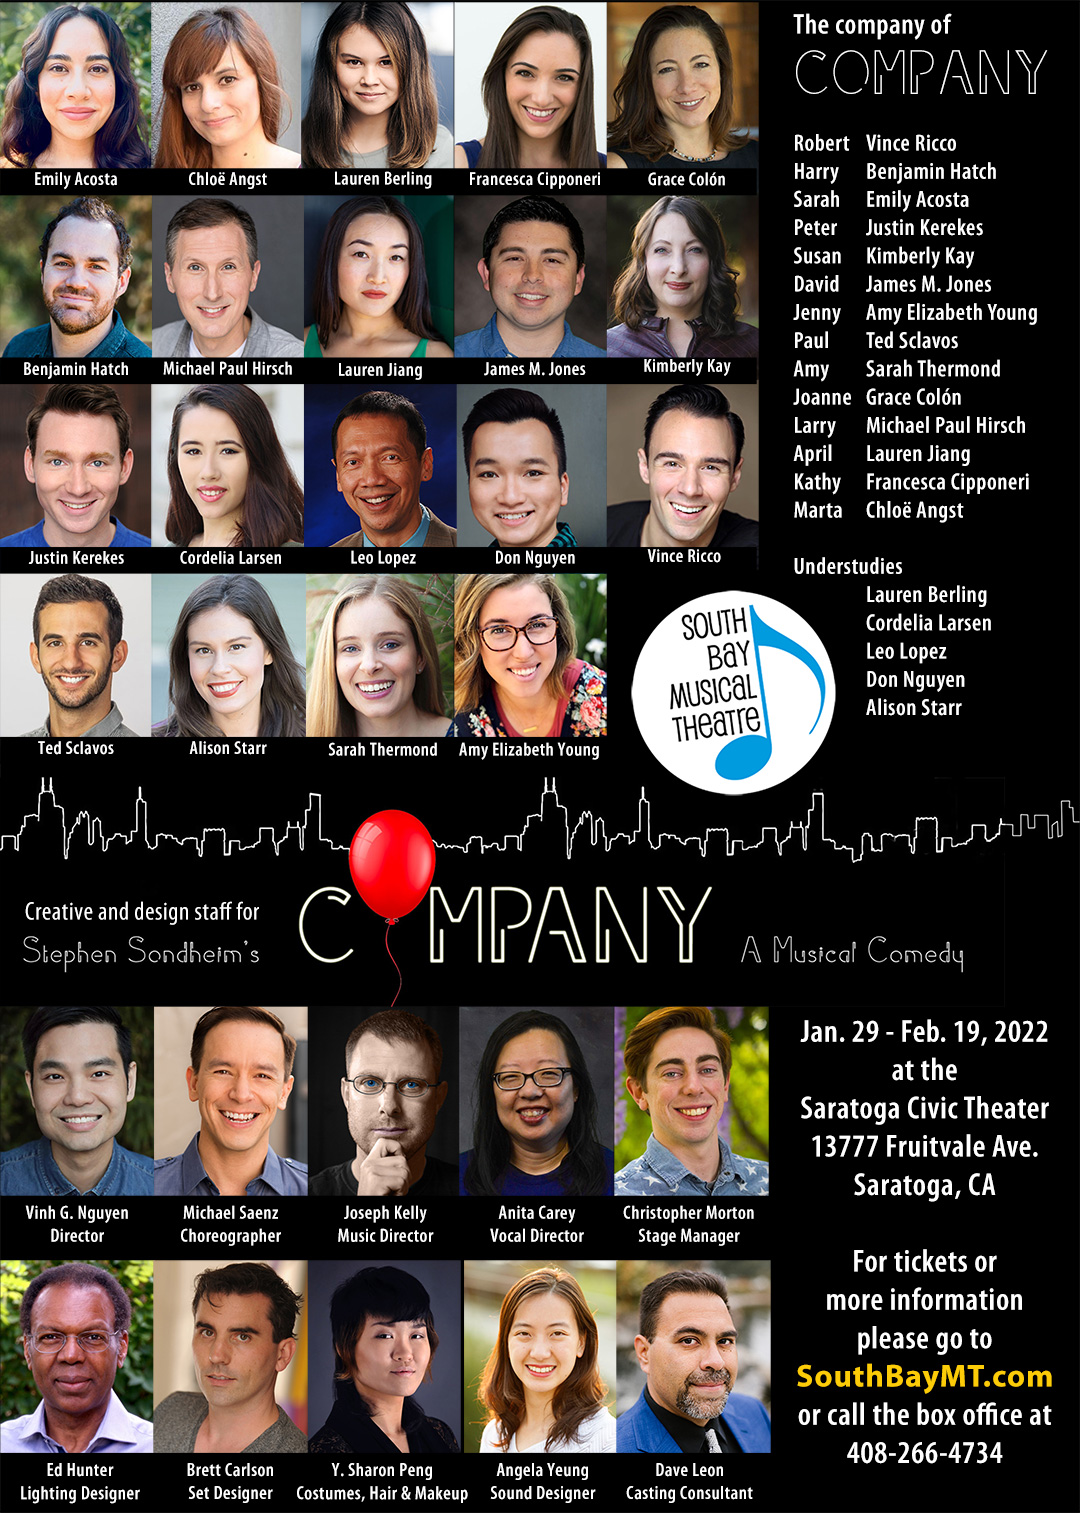 The cast of COMPANY